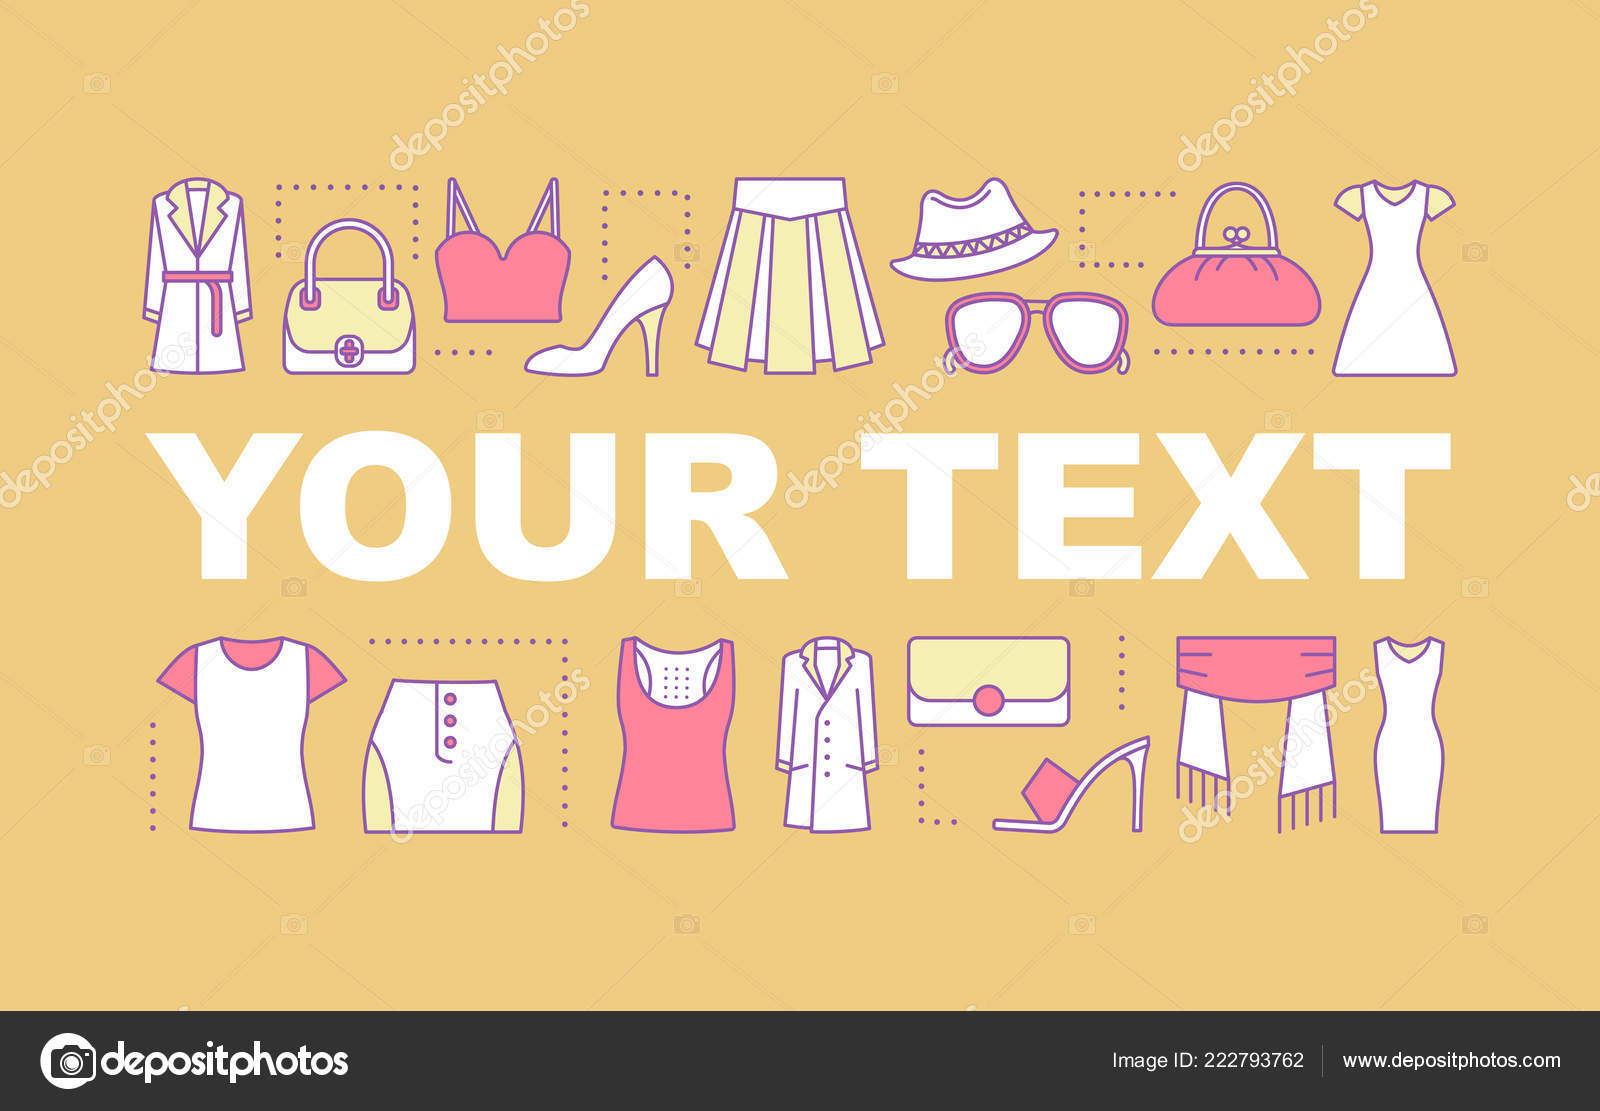 Women Clothes Word Concepts Banner Clothing Store Fashion Presentation Website Stock Vector C Bsd 222793762